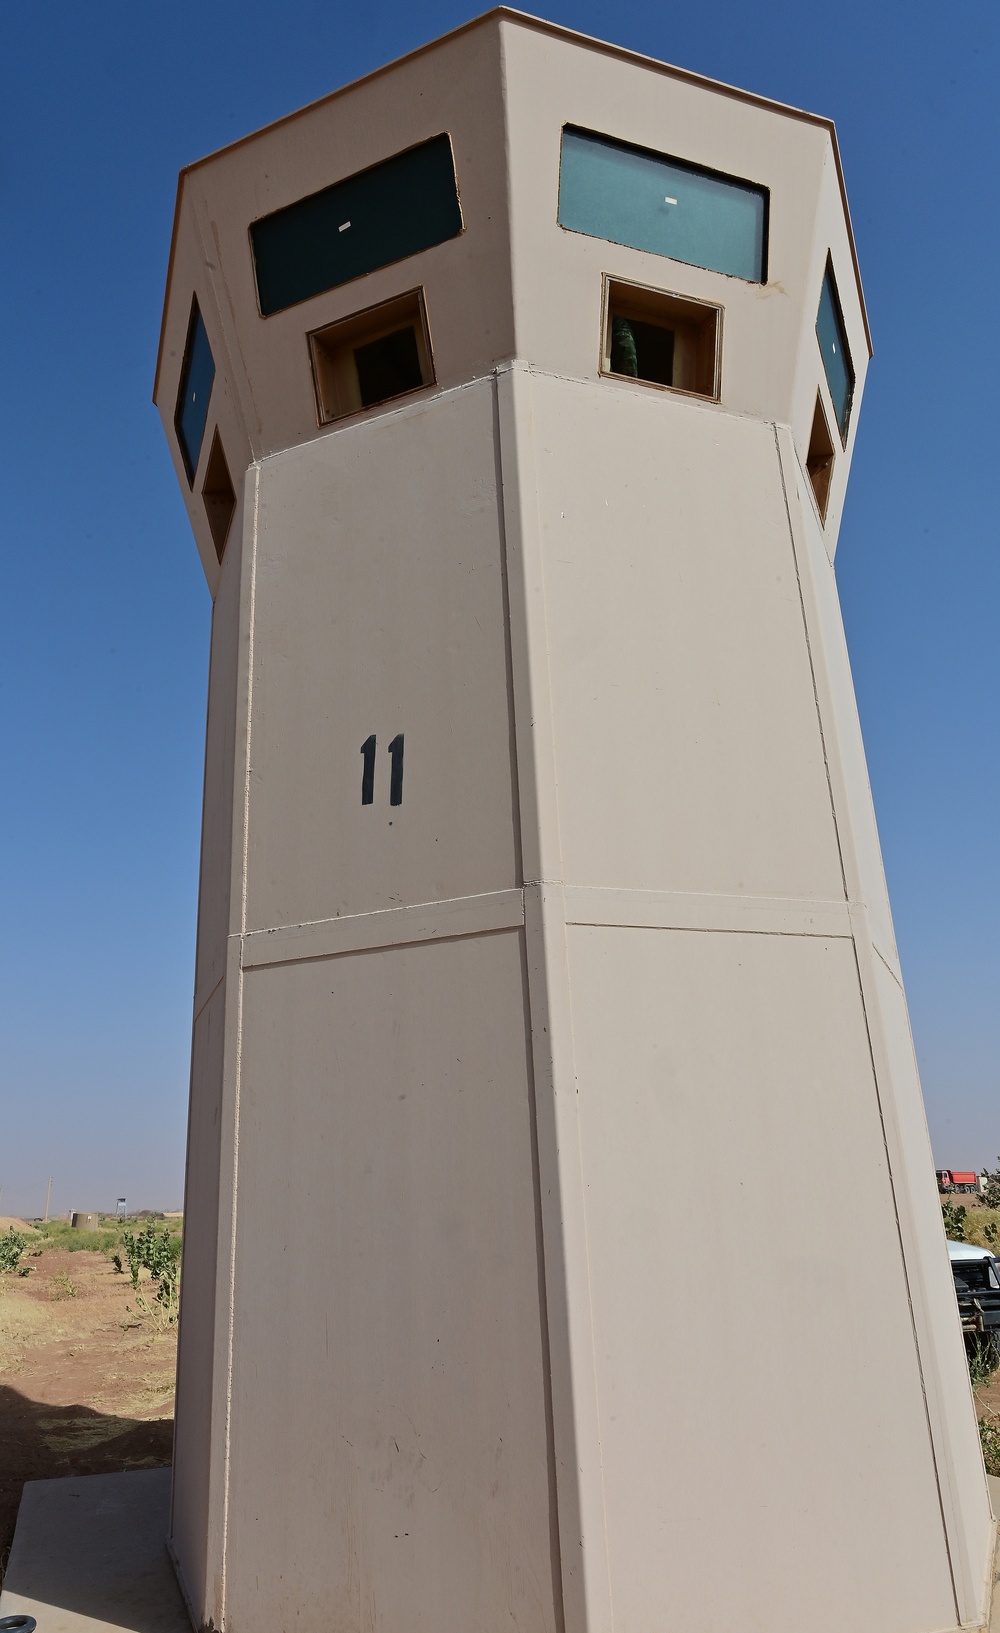 Adapt and overcome! Airmen in Africa modify guard towers